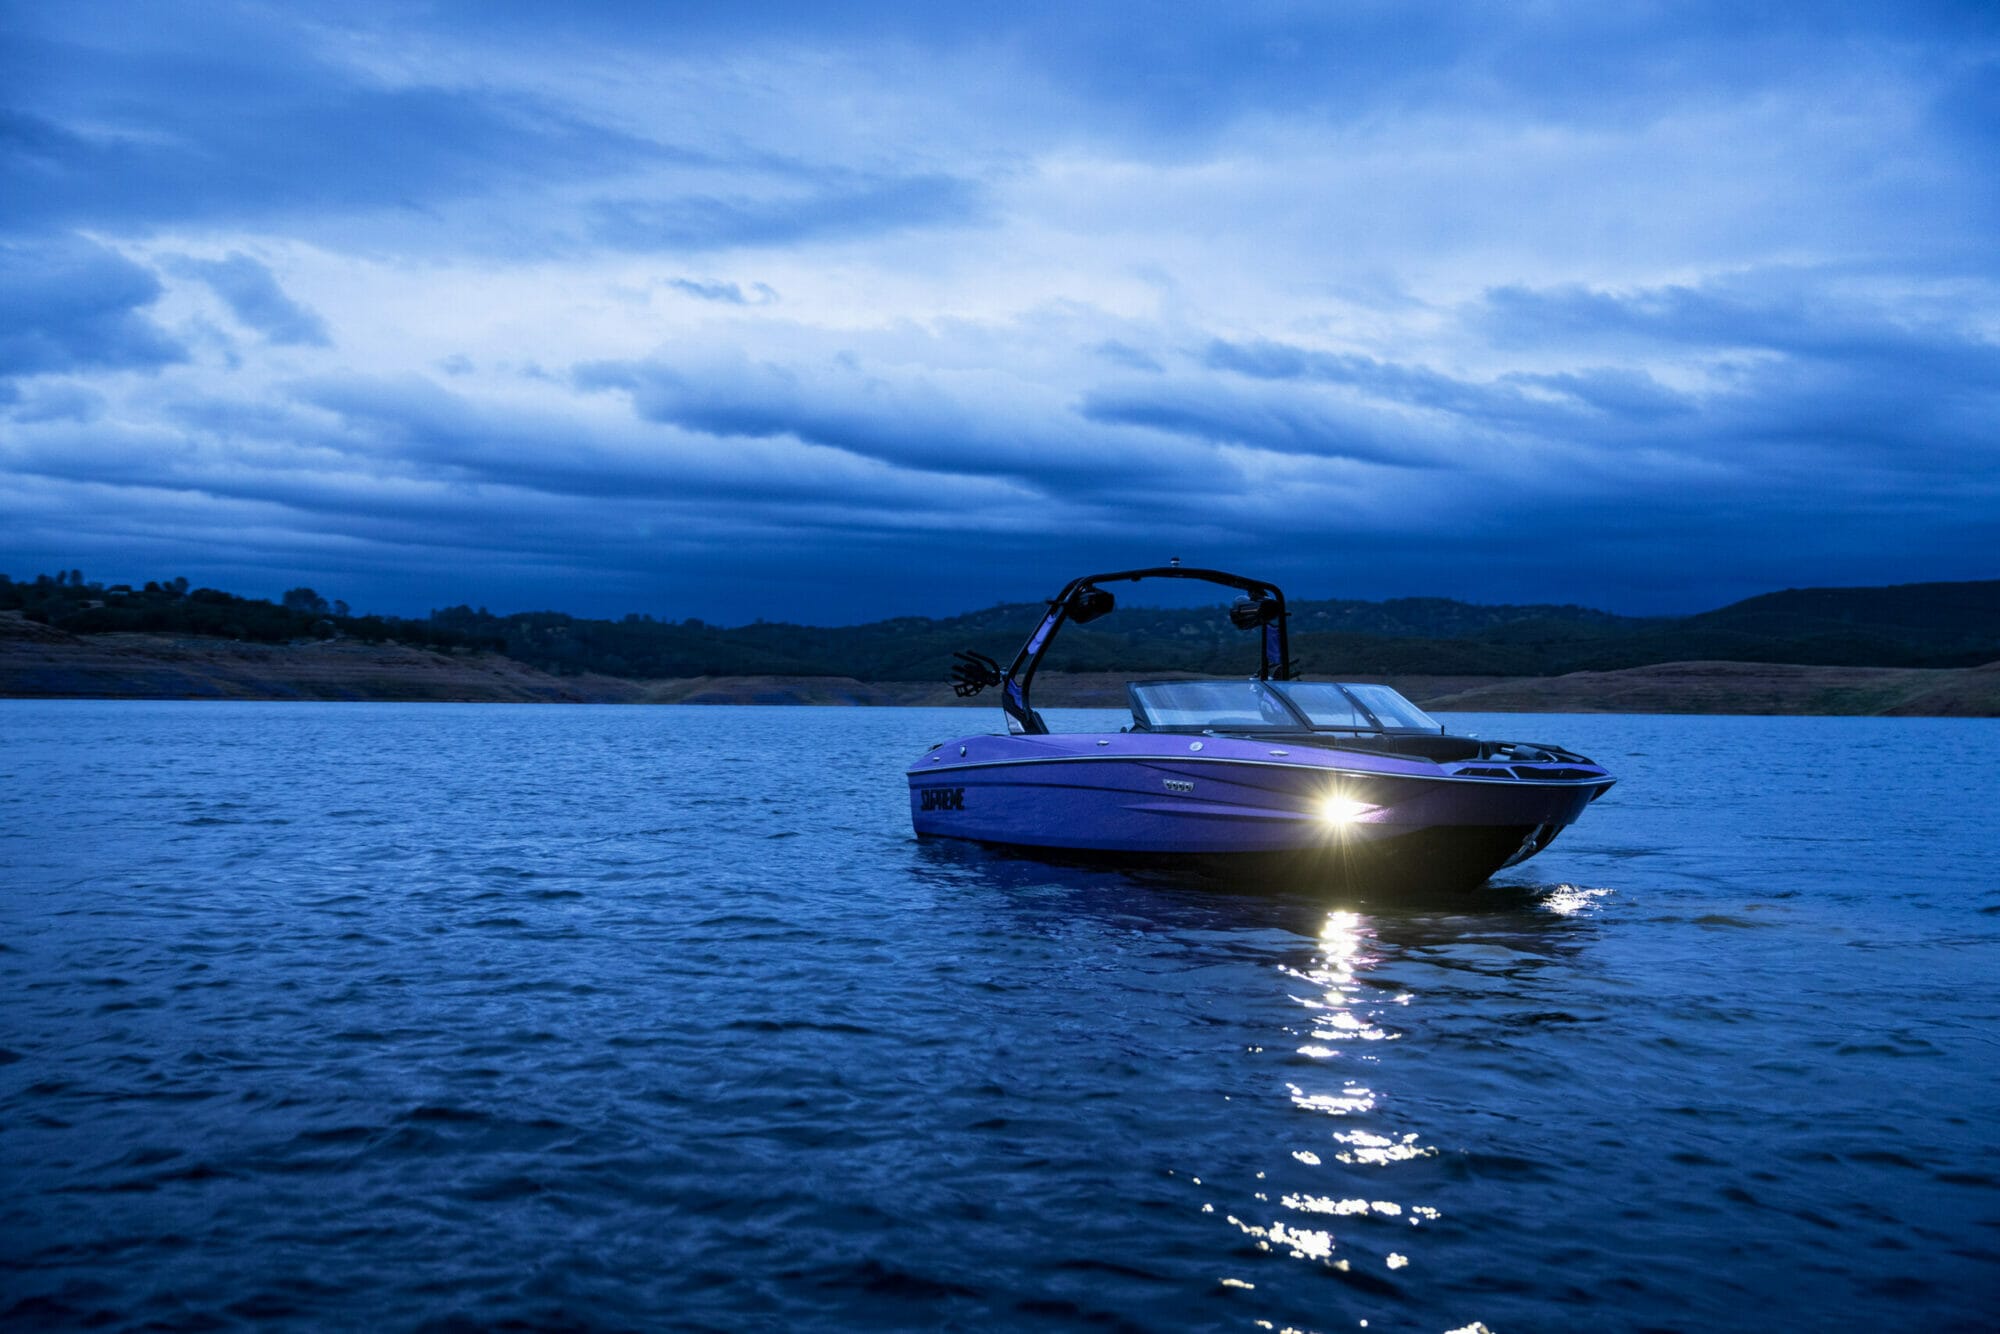 Purple S220 Supreme boat with headlights on at night